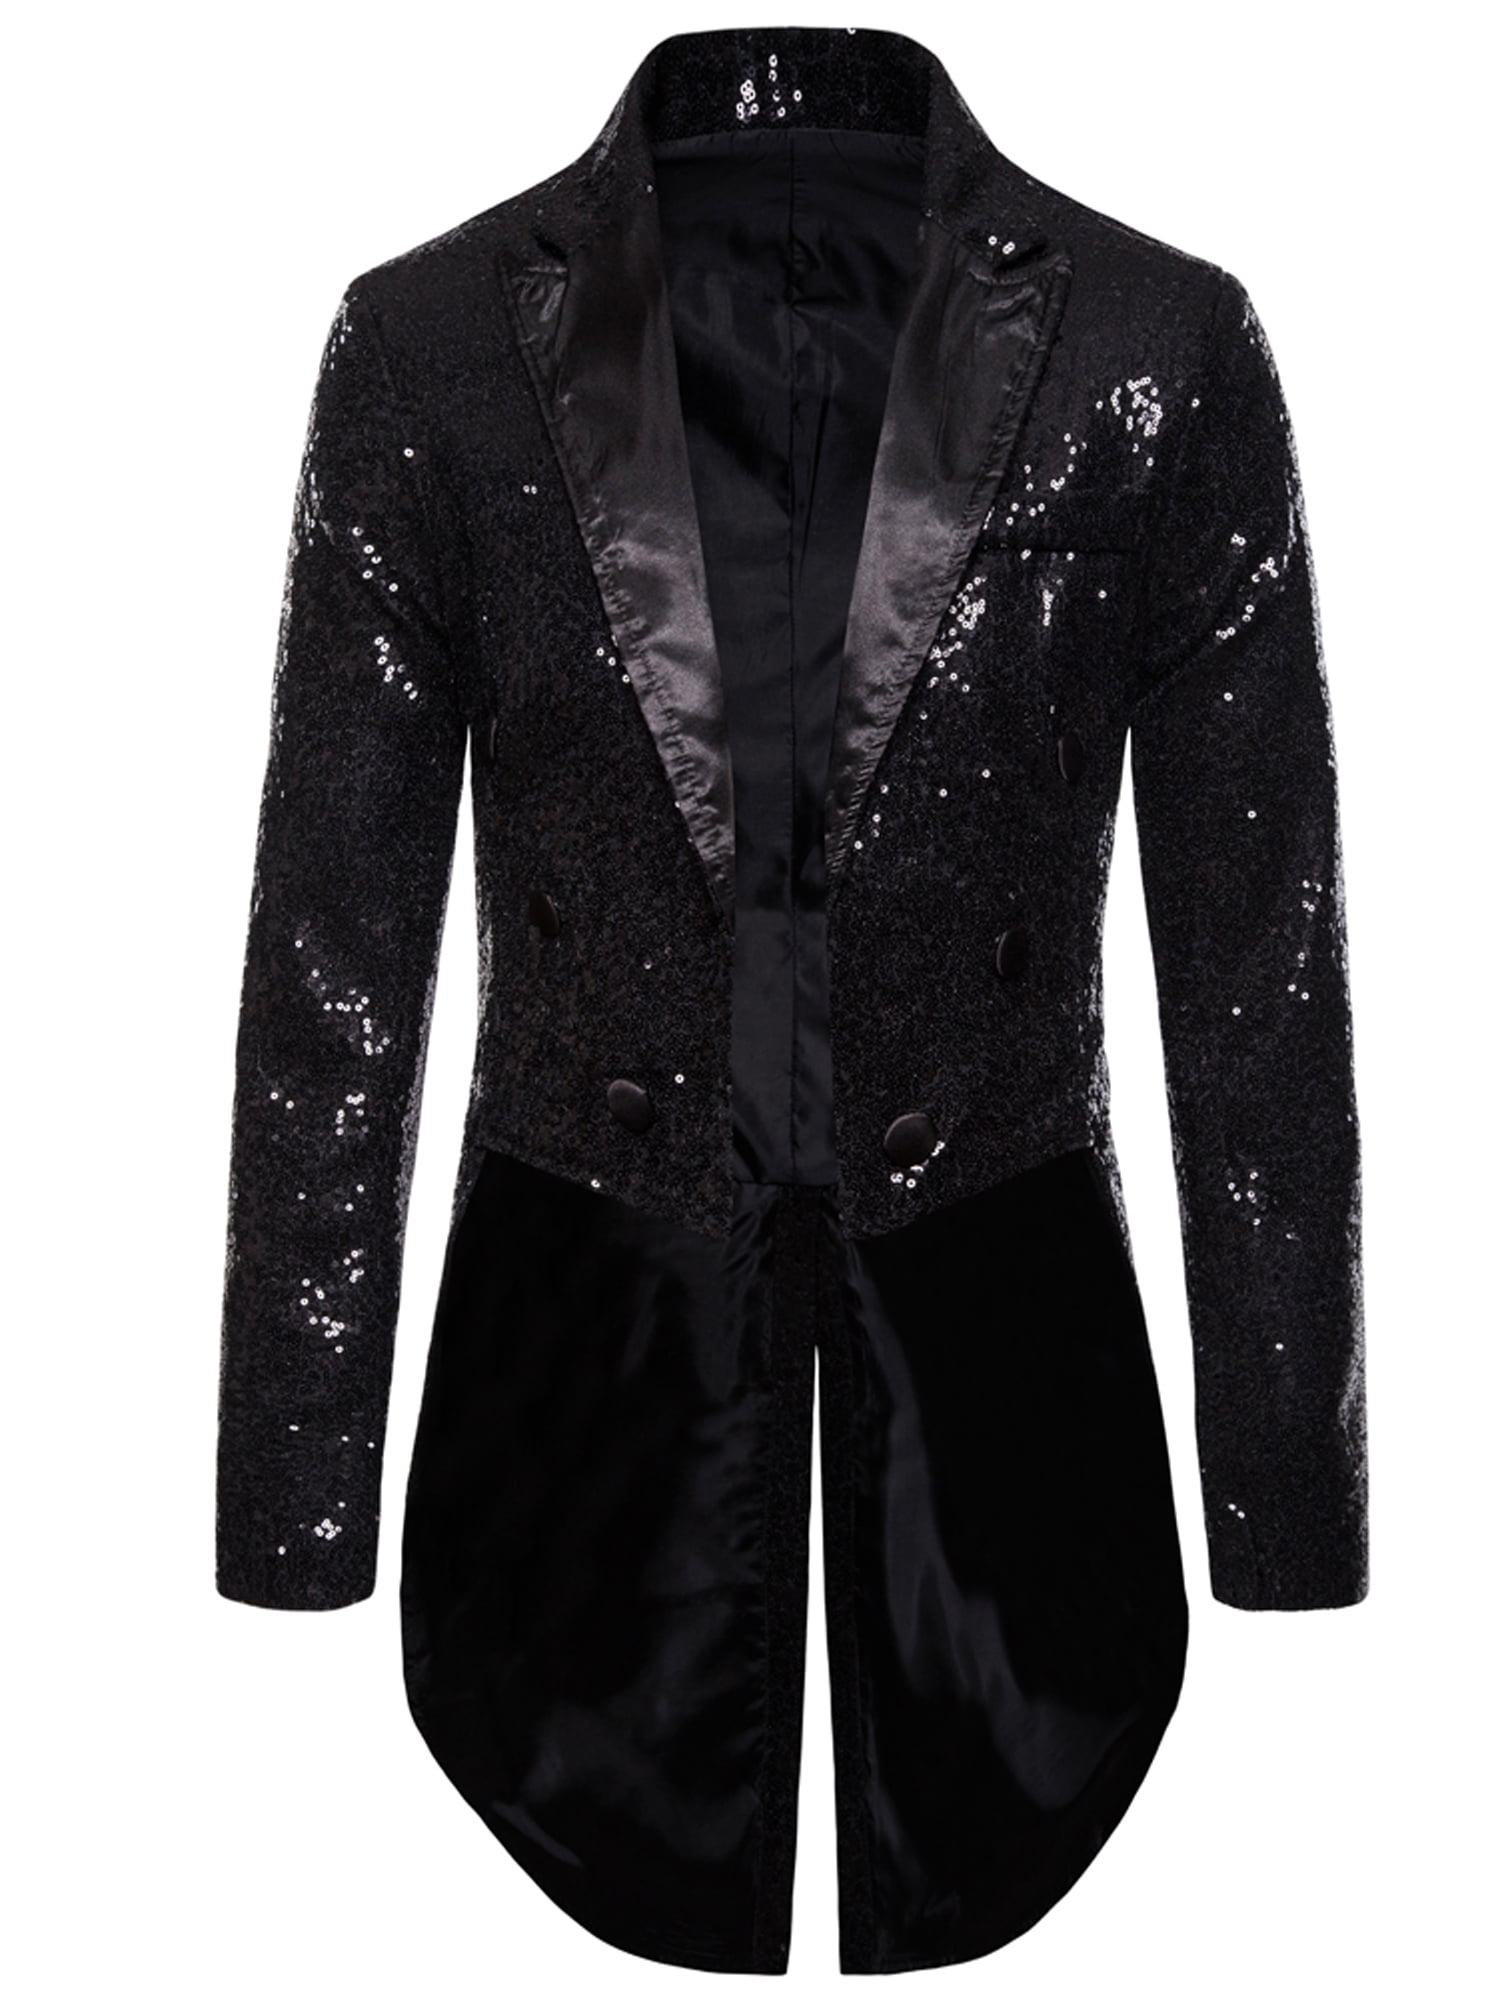 CANIS Men's Suit,Tailcoat Swallowtail Shiny Party Wedding Blazer